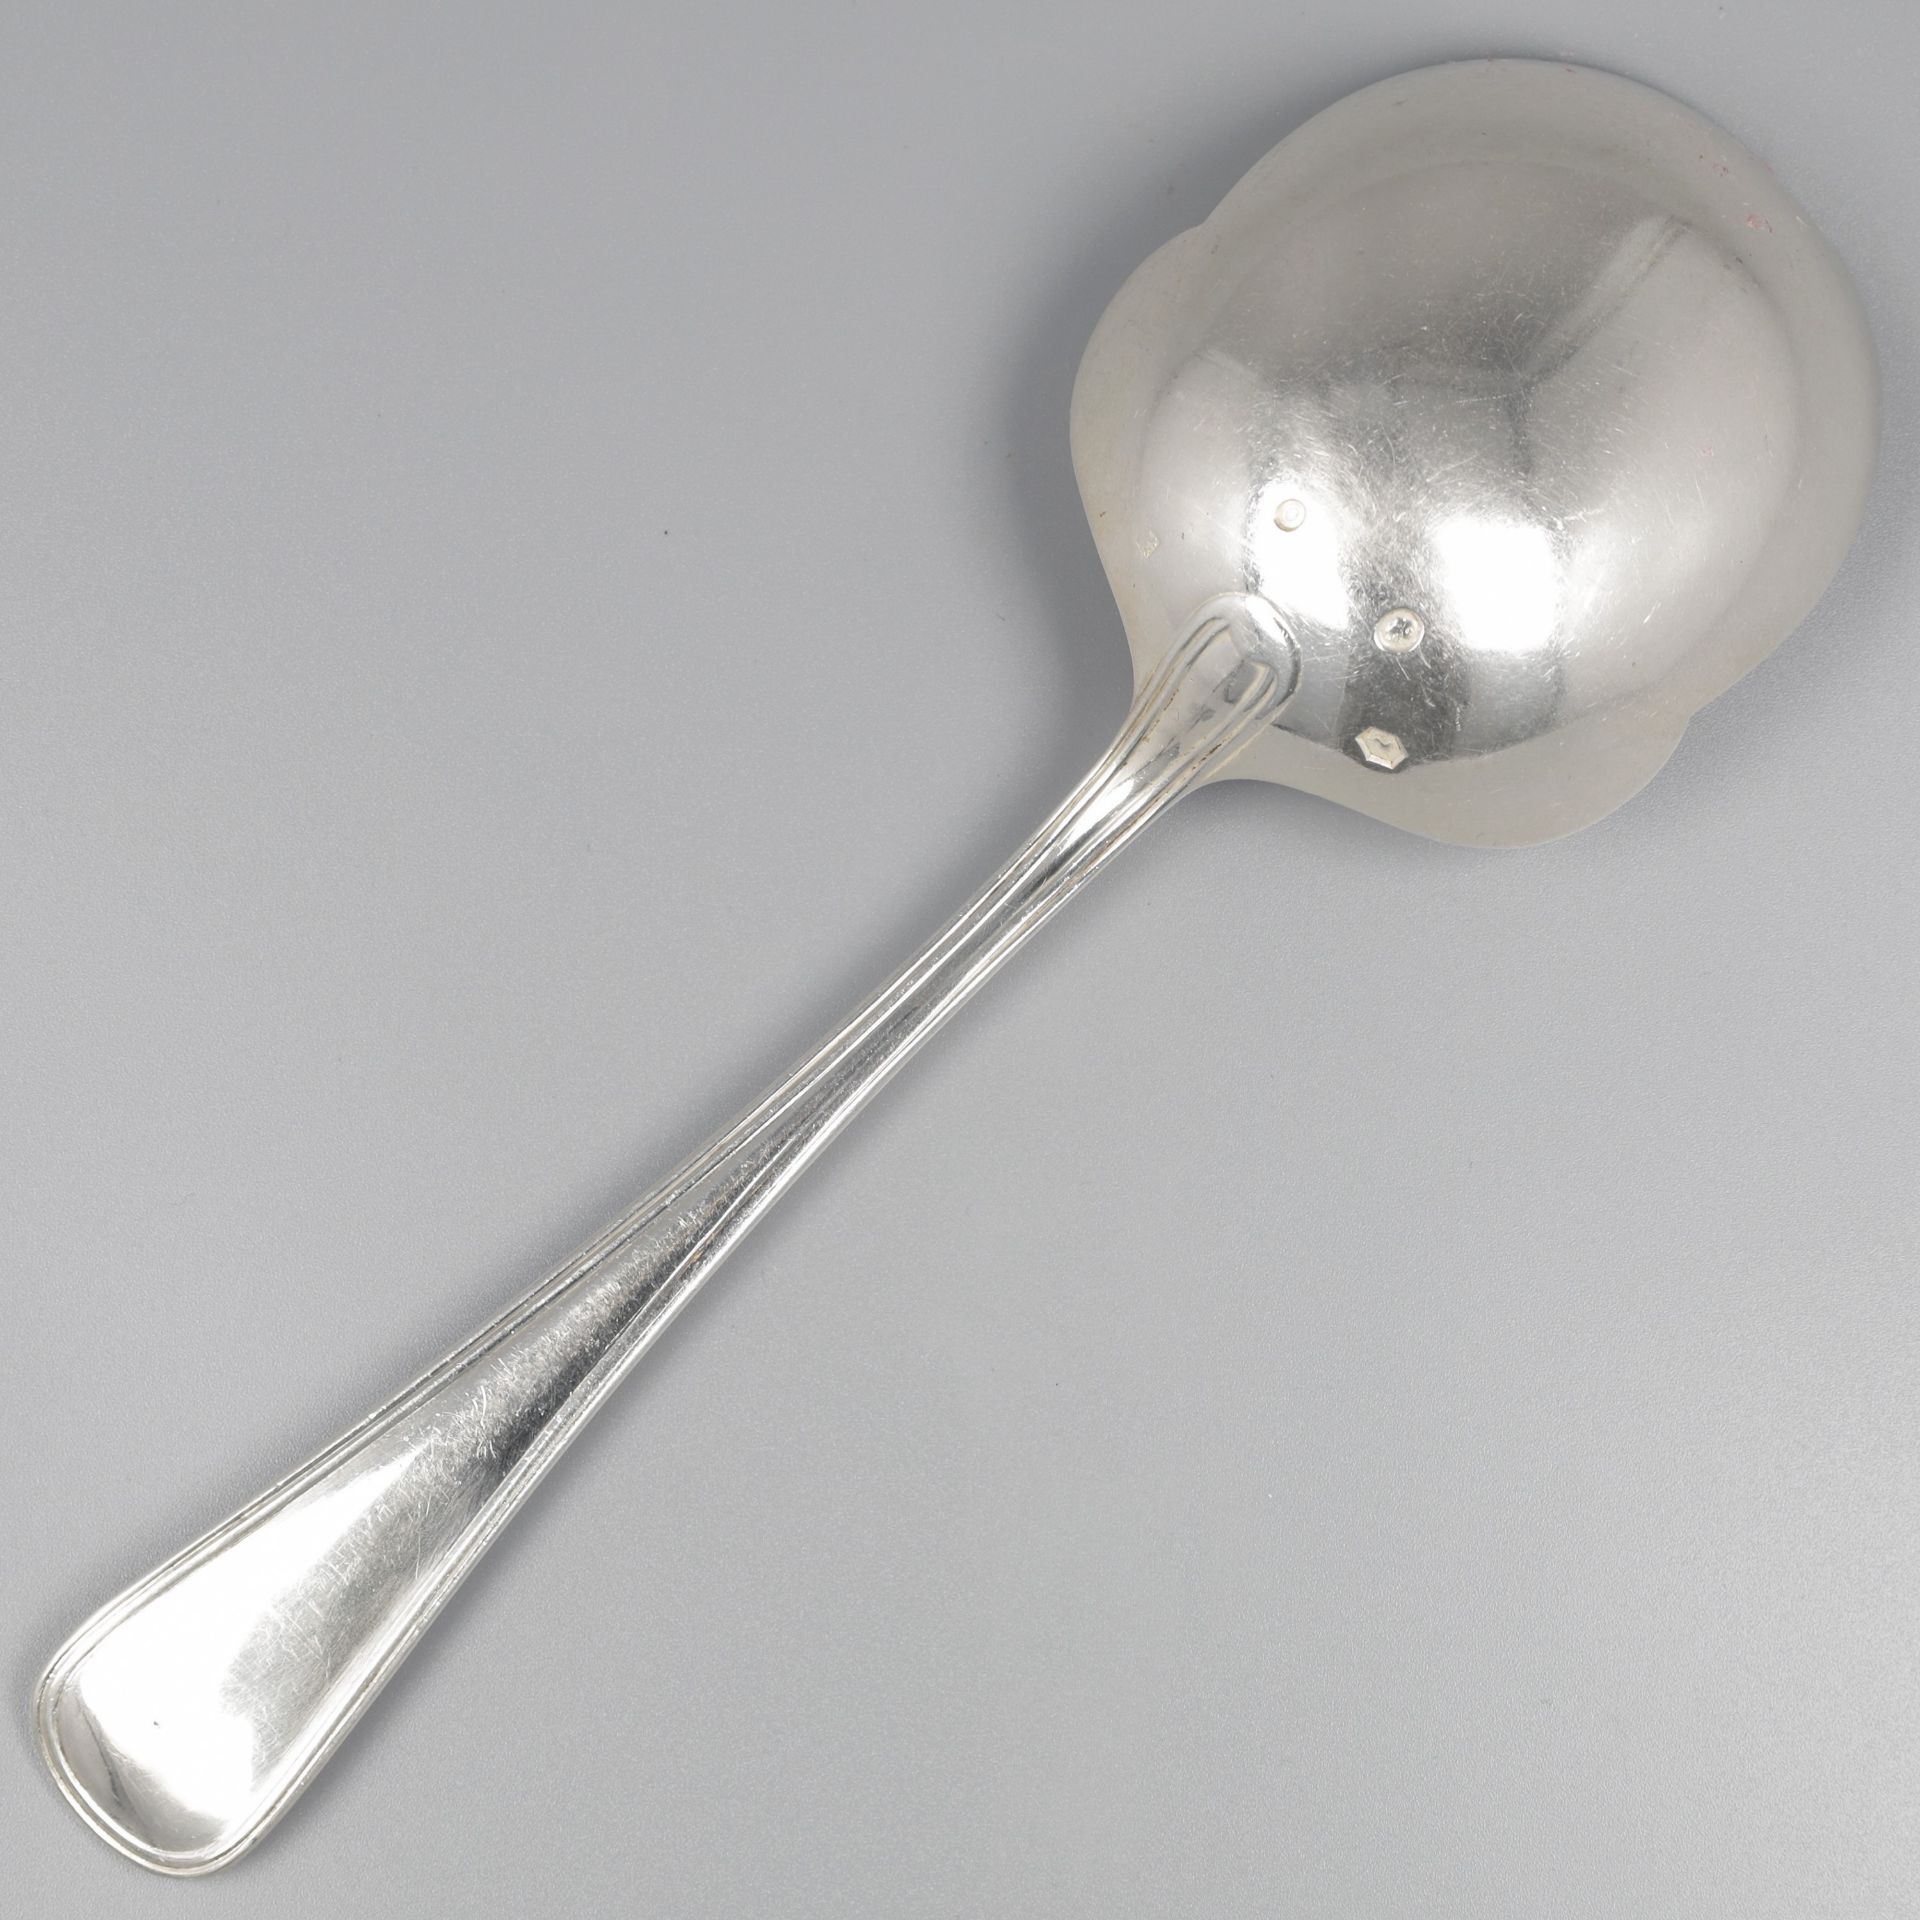 No reserve - Potato serving spoon "Hollands Rondfilet" silver. - Image 2 of 7